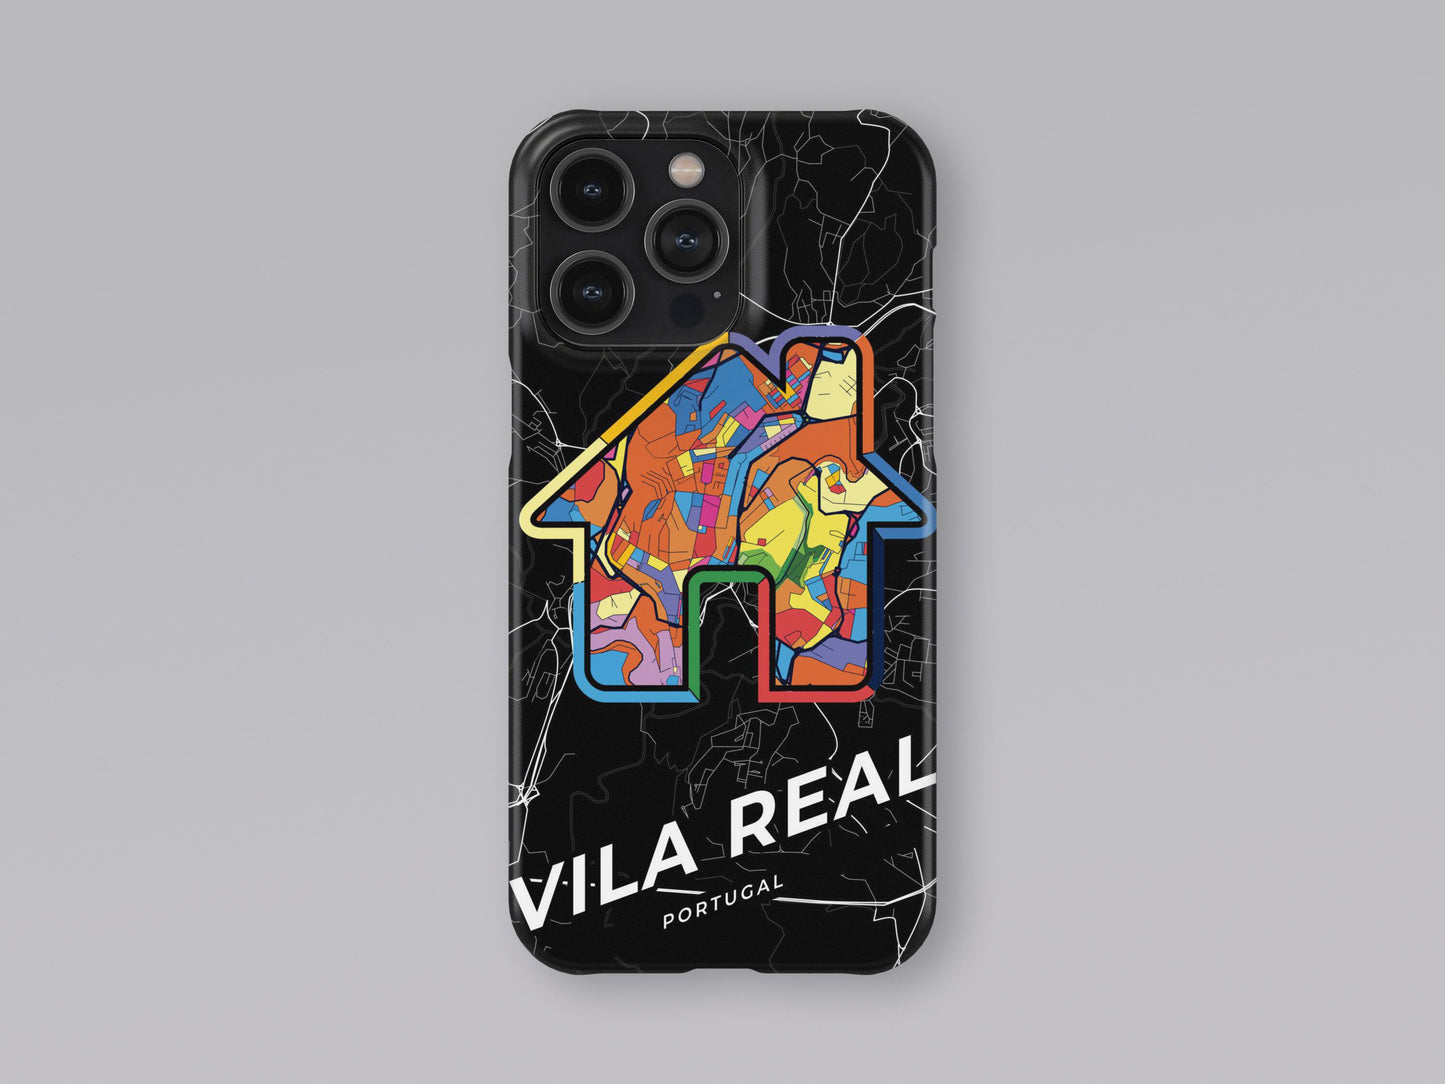 Vila Real Portugal slim phone case with colorful icon 3